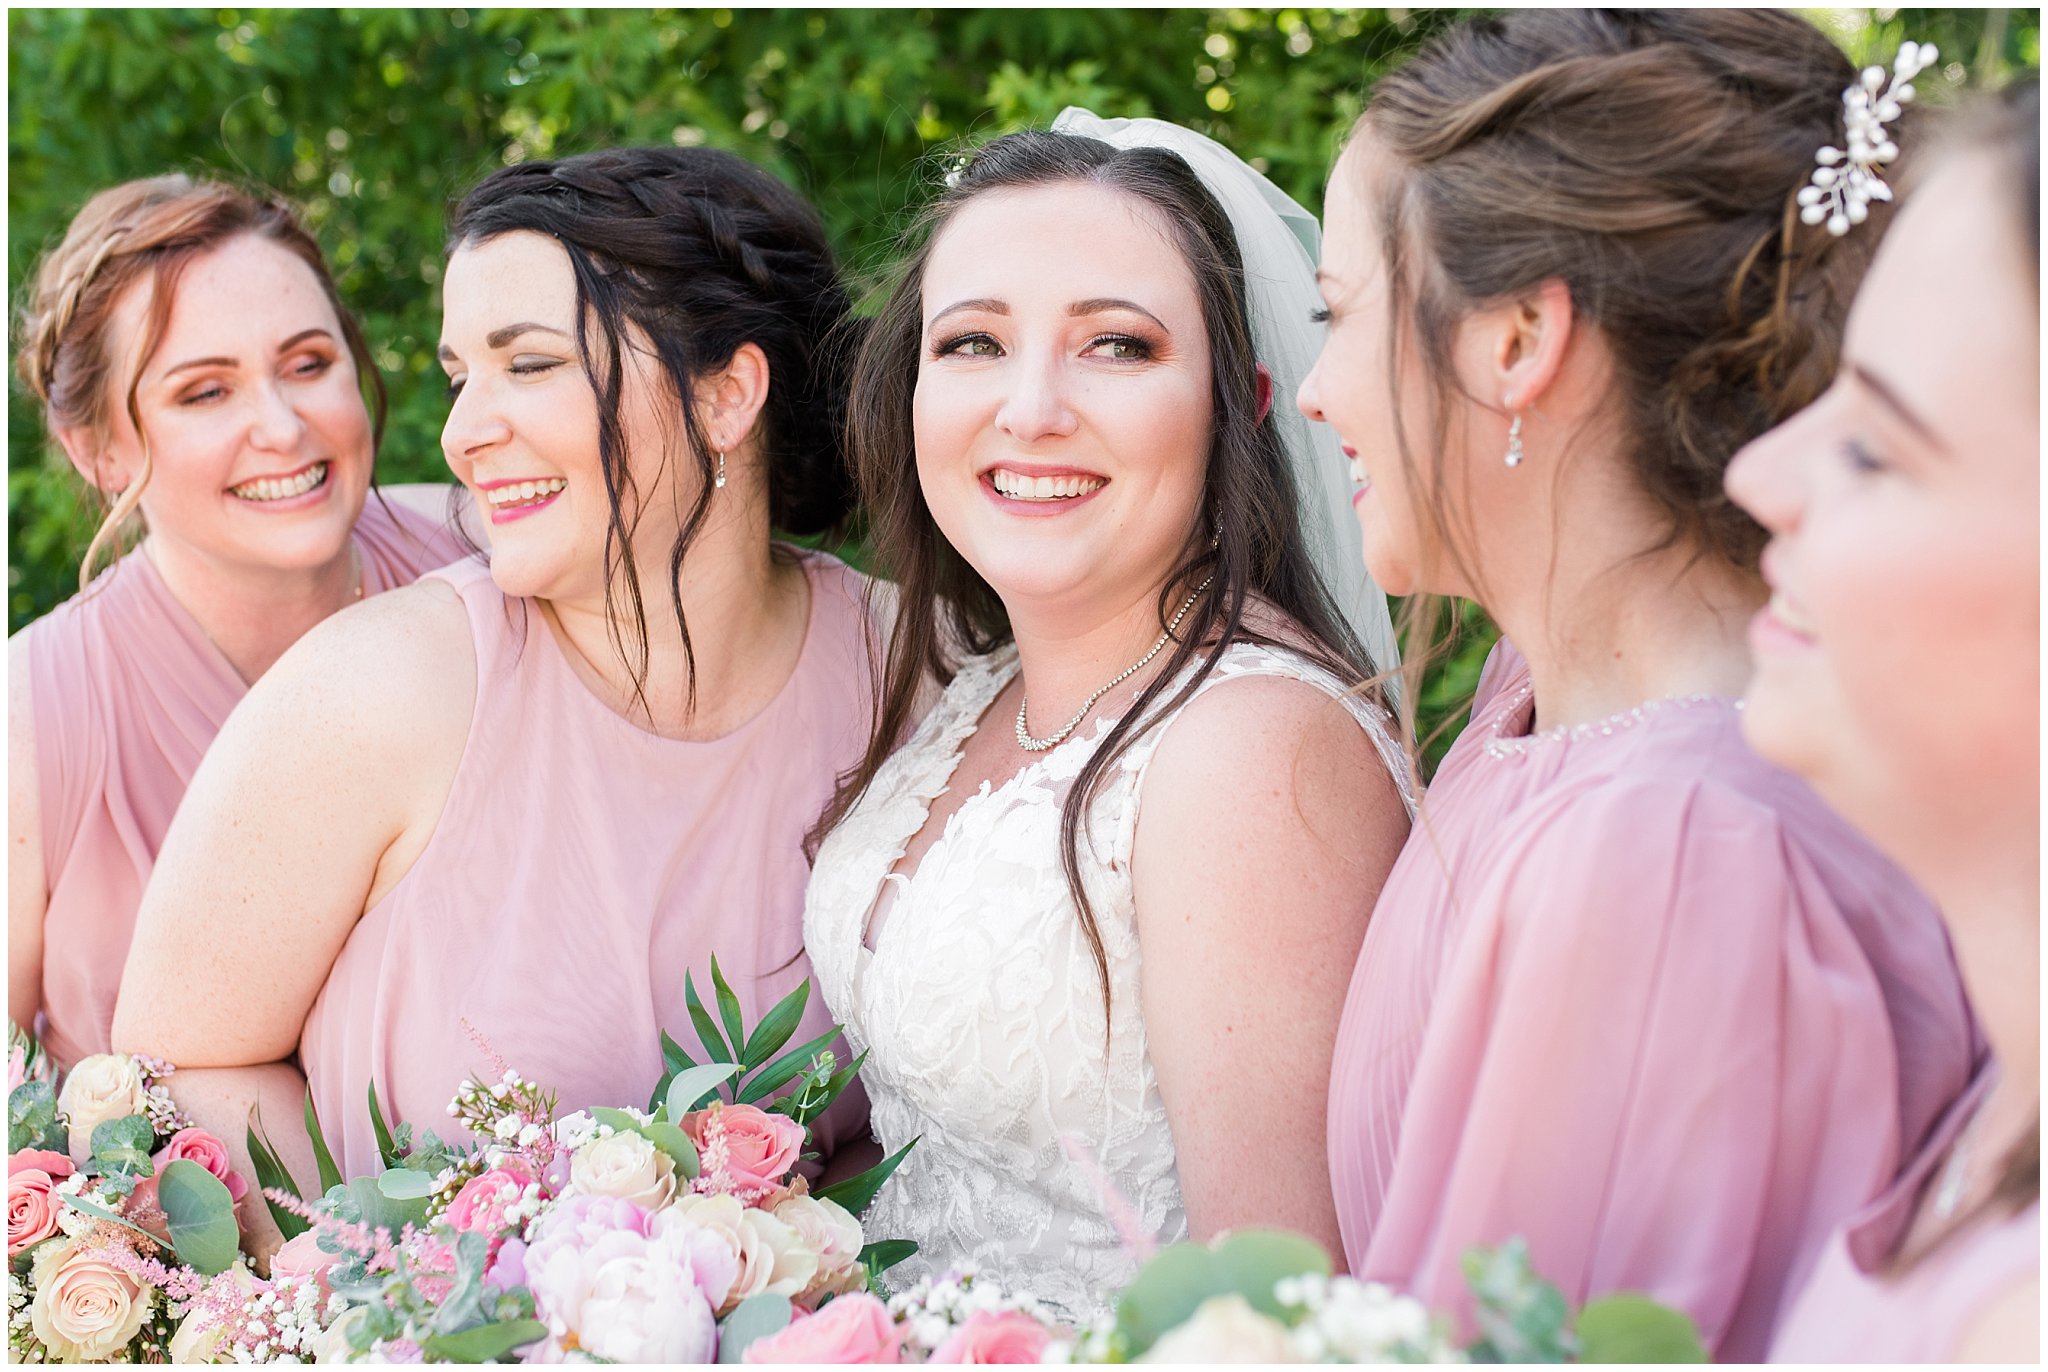 Bride and bridesmaids in blush dusty rose dresses with green white and blush florals | Oak Hills Utah Dusty Rose and Gray Summer Wedding | Jessie and Dallin Photography